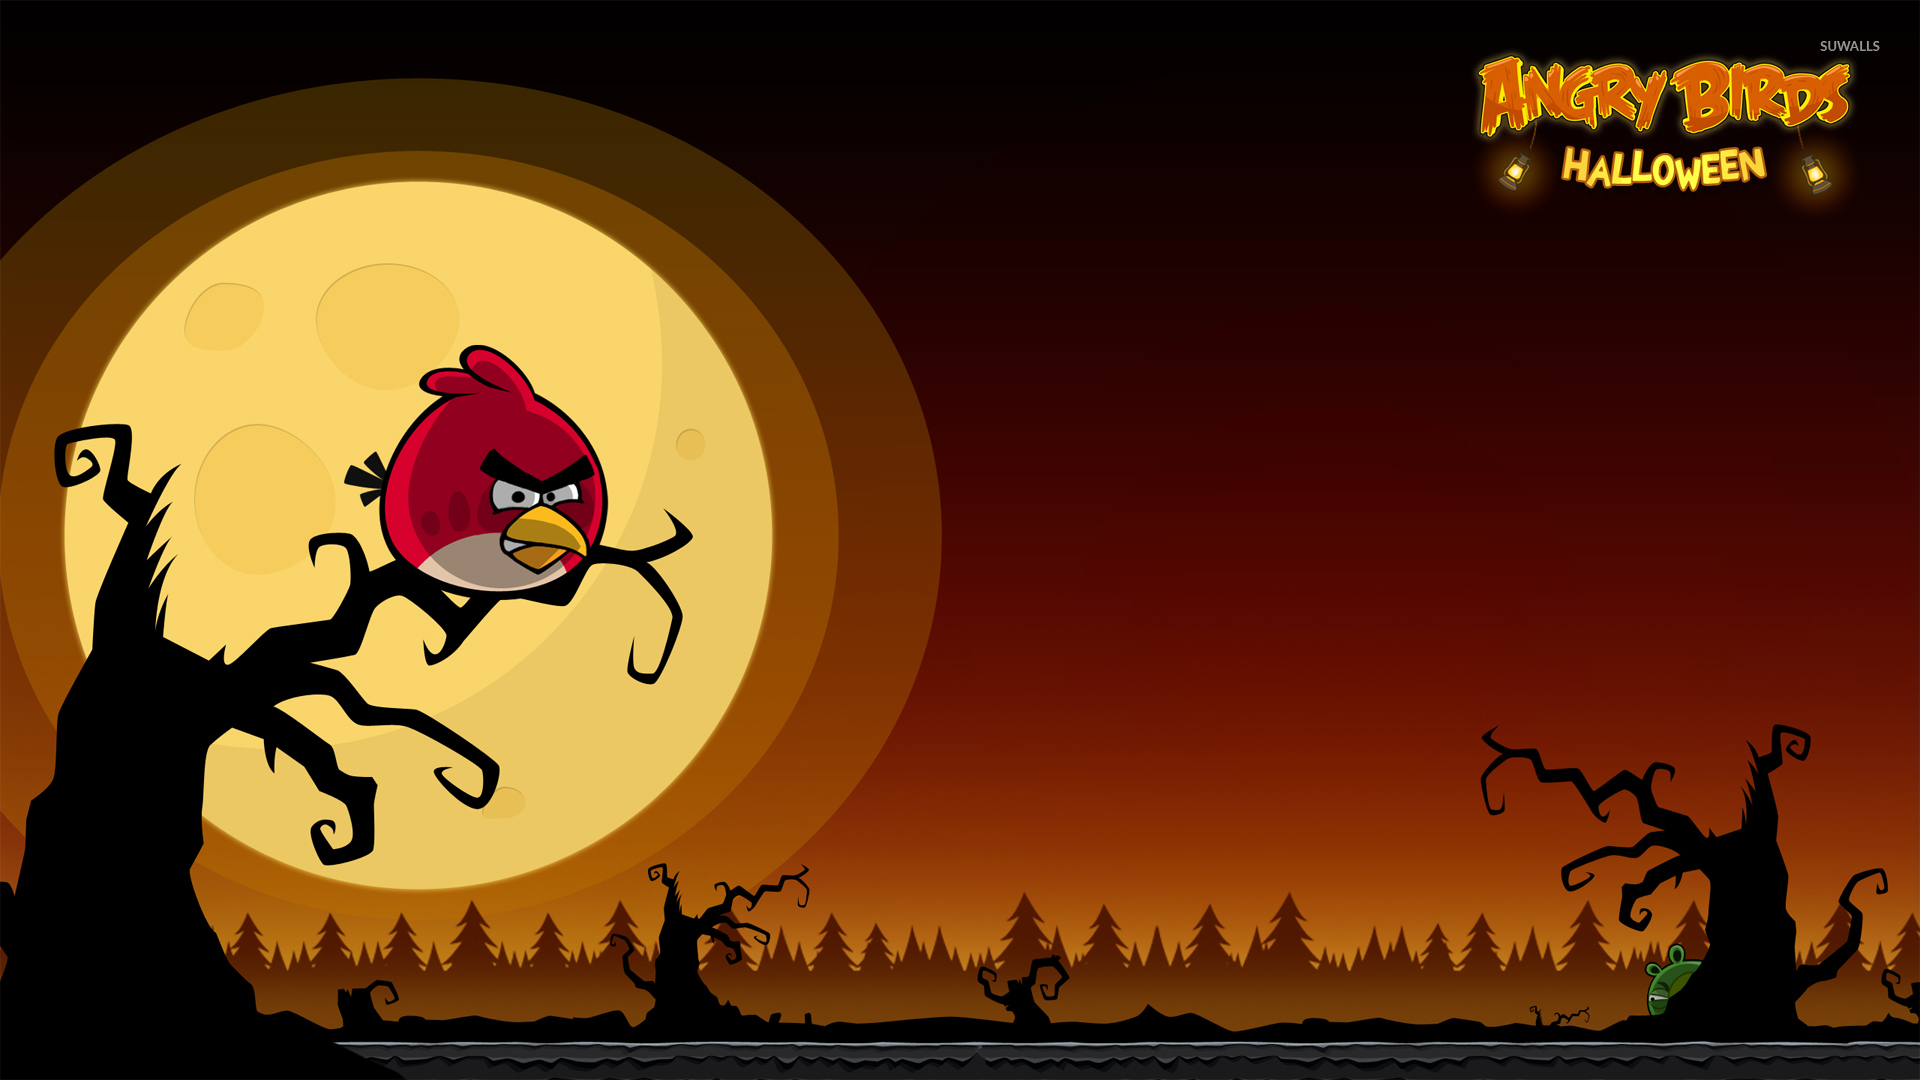 Angry Birds Seasons - Angry Birds Halloween Background , HD Wallpaper & Backgrounds